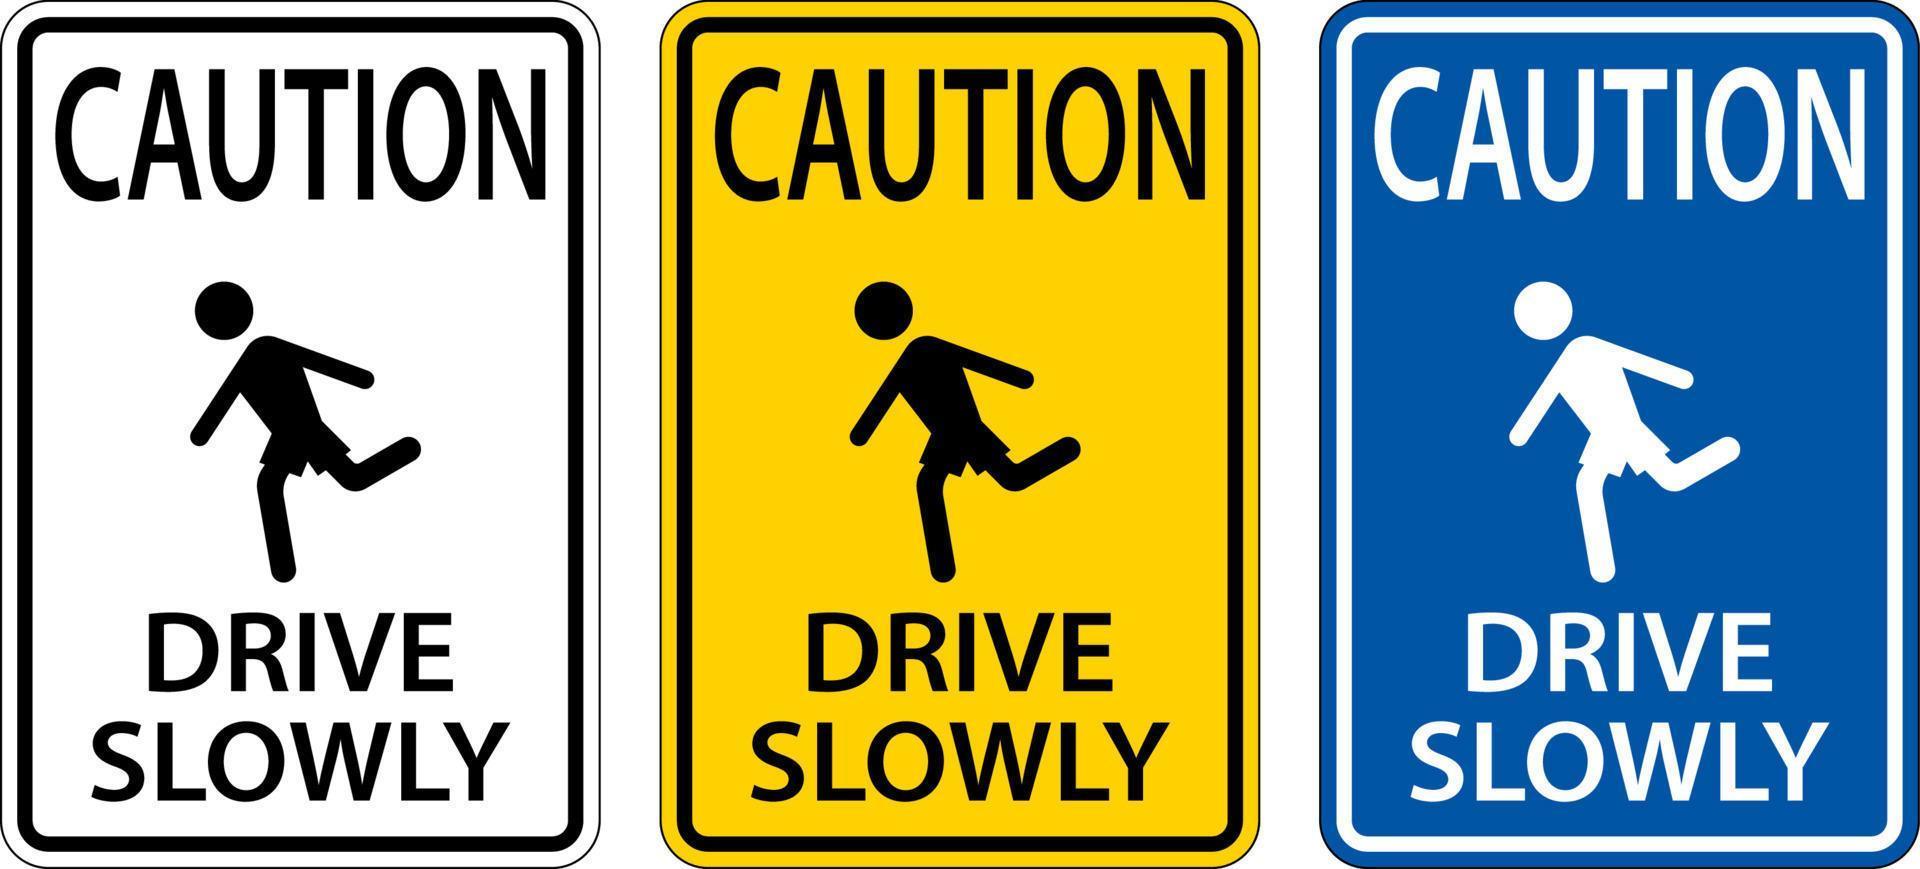 Caution Drive Slowly sign On White Background vector